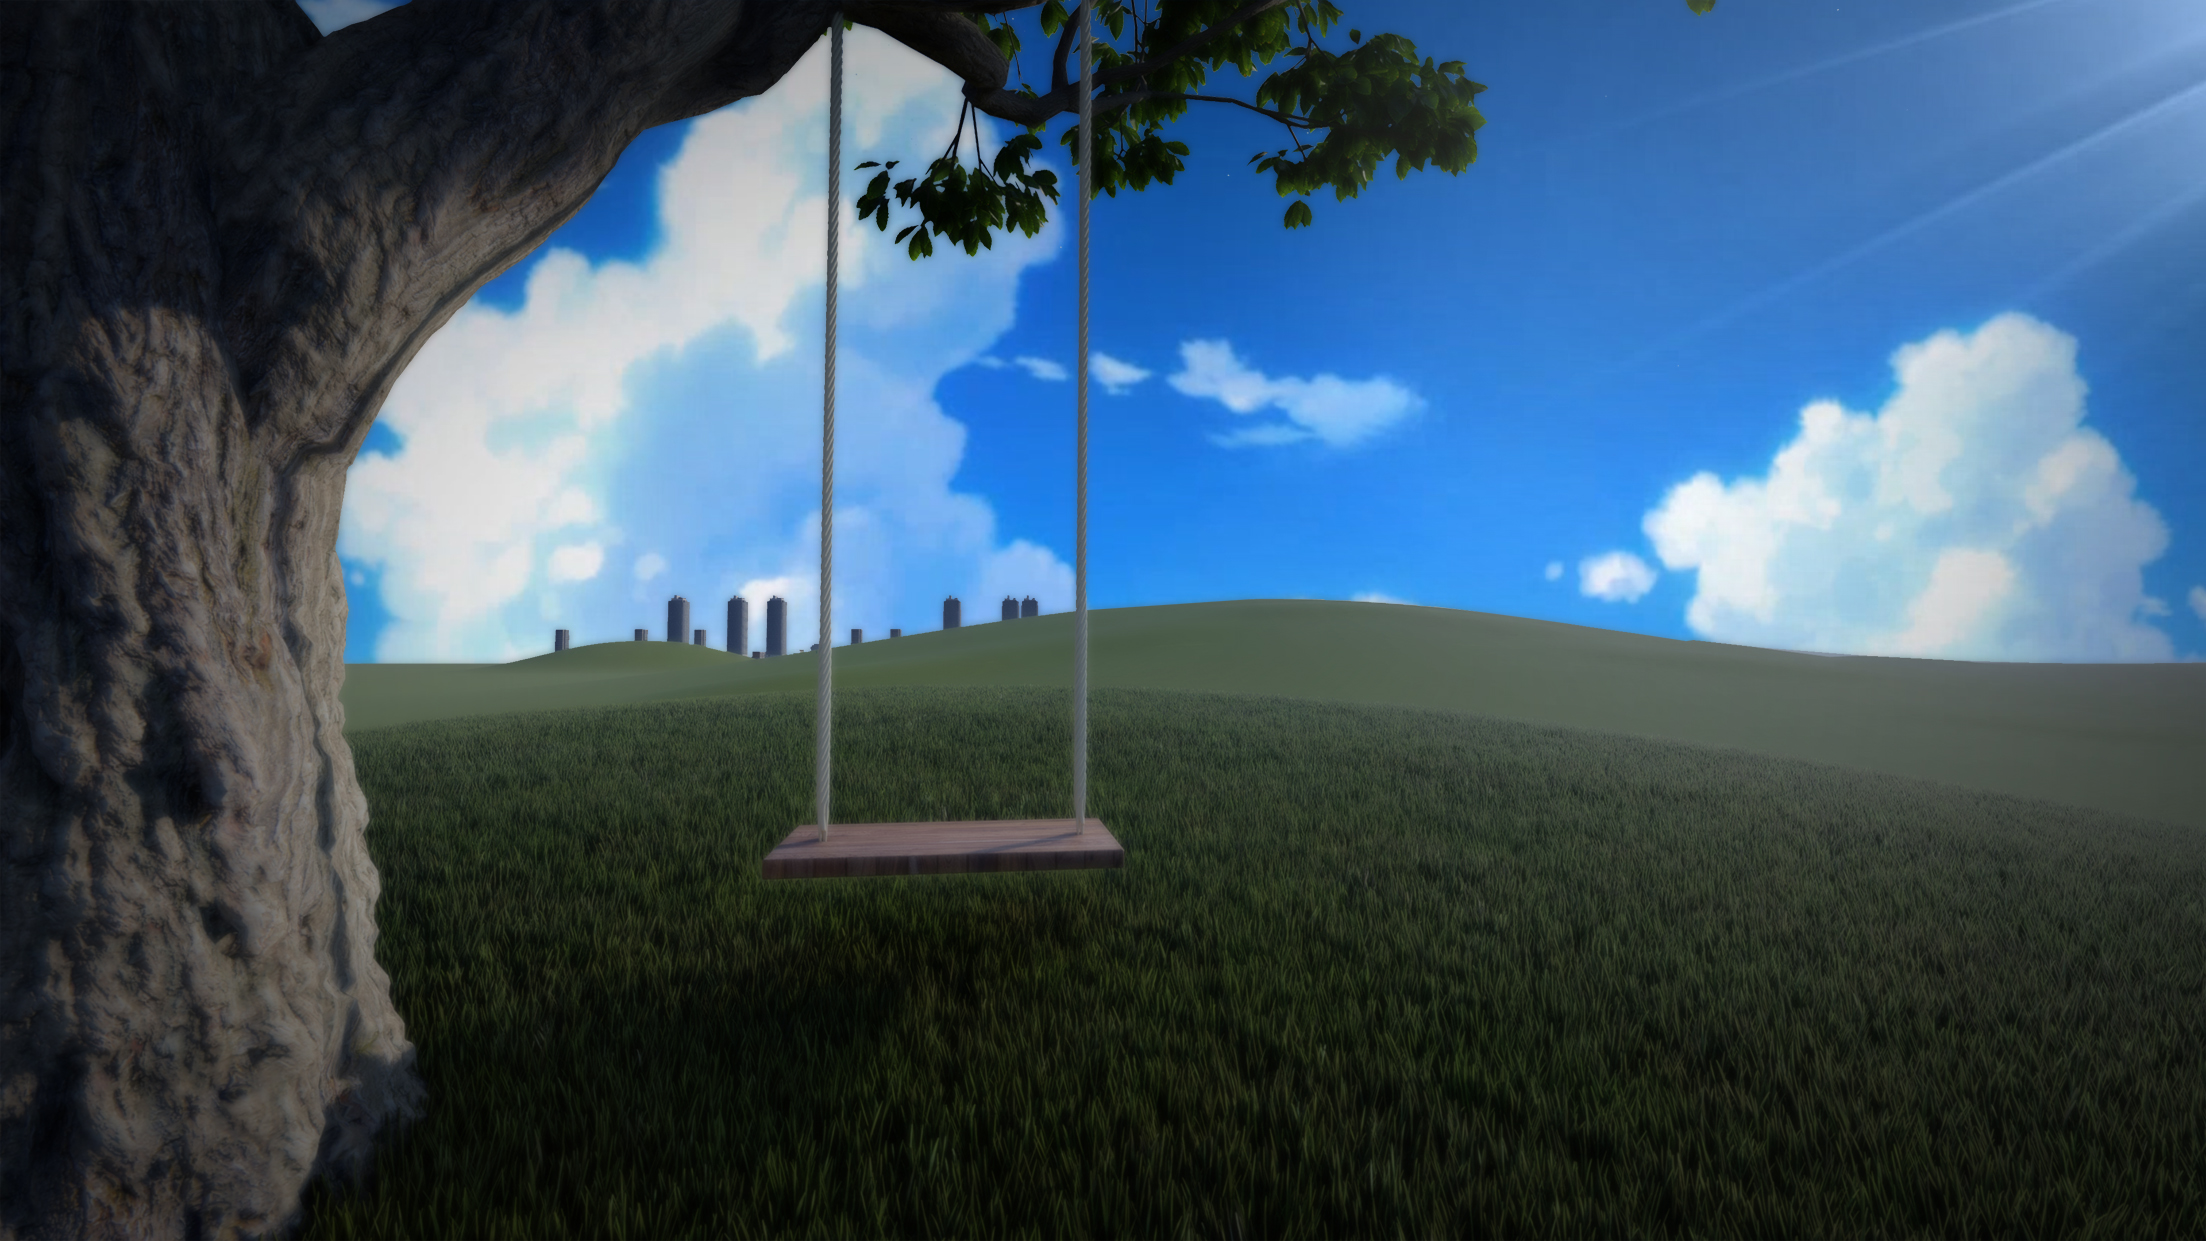 Free Tree Swing Background by Game Dev Assets